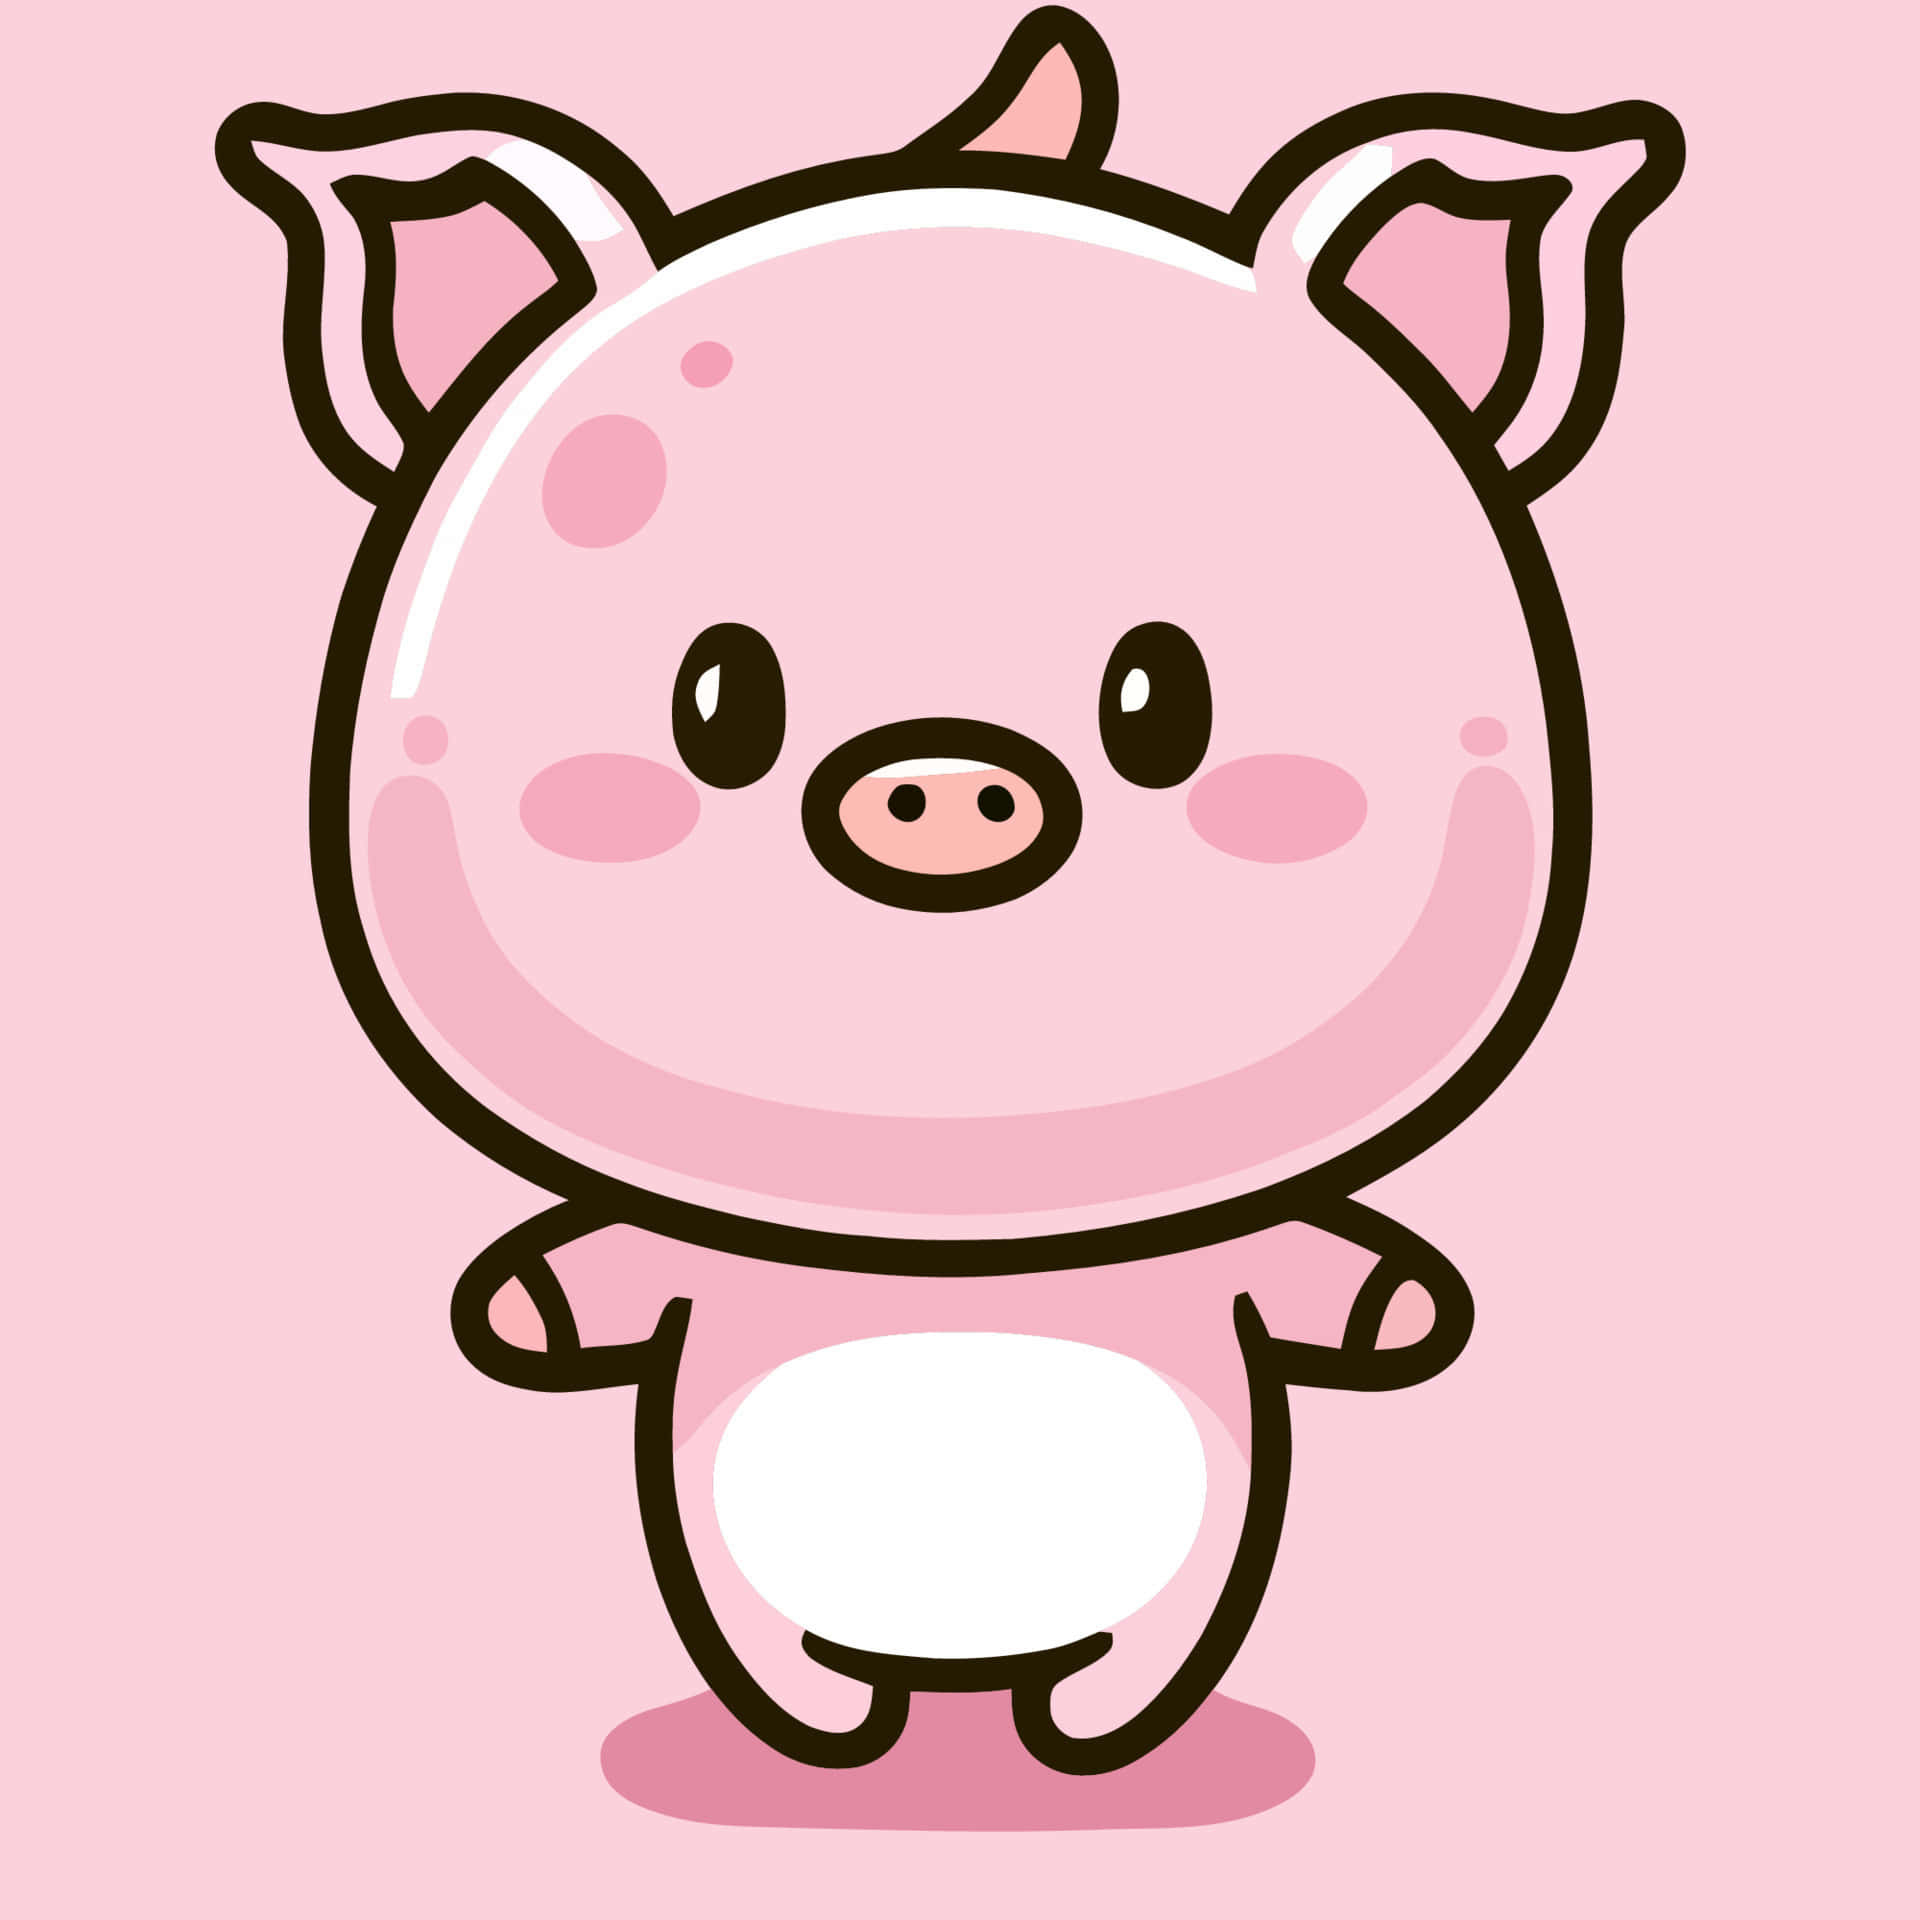 This cute little pig is ready for snuggles!